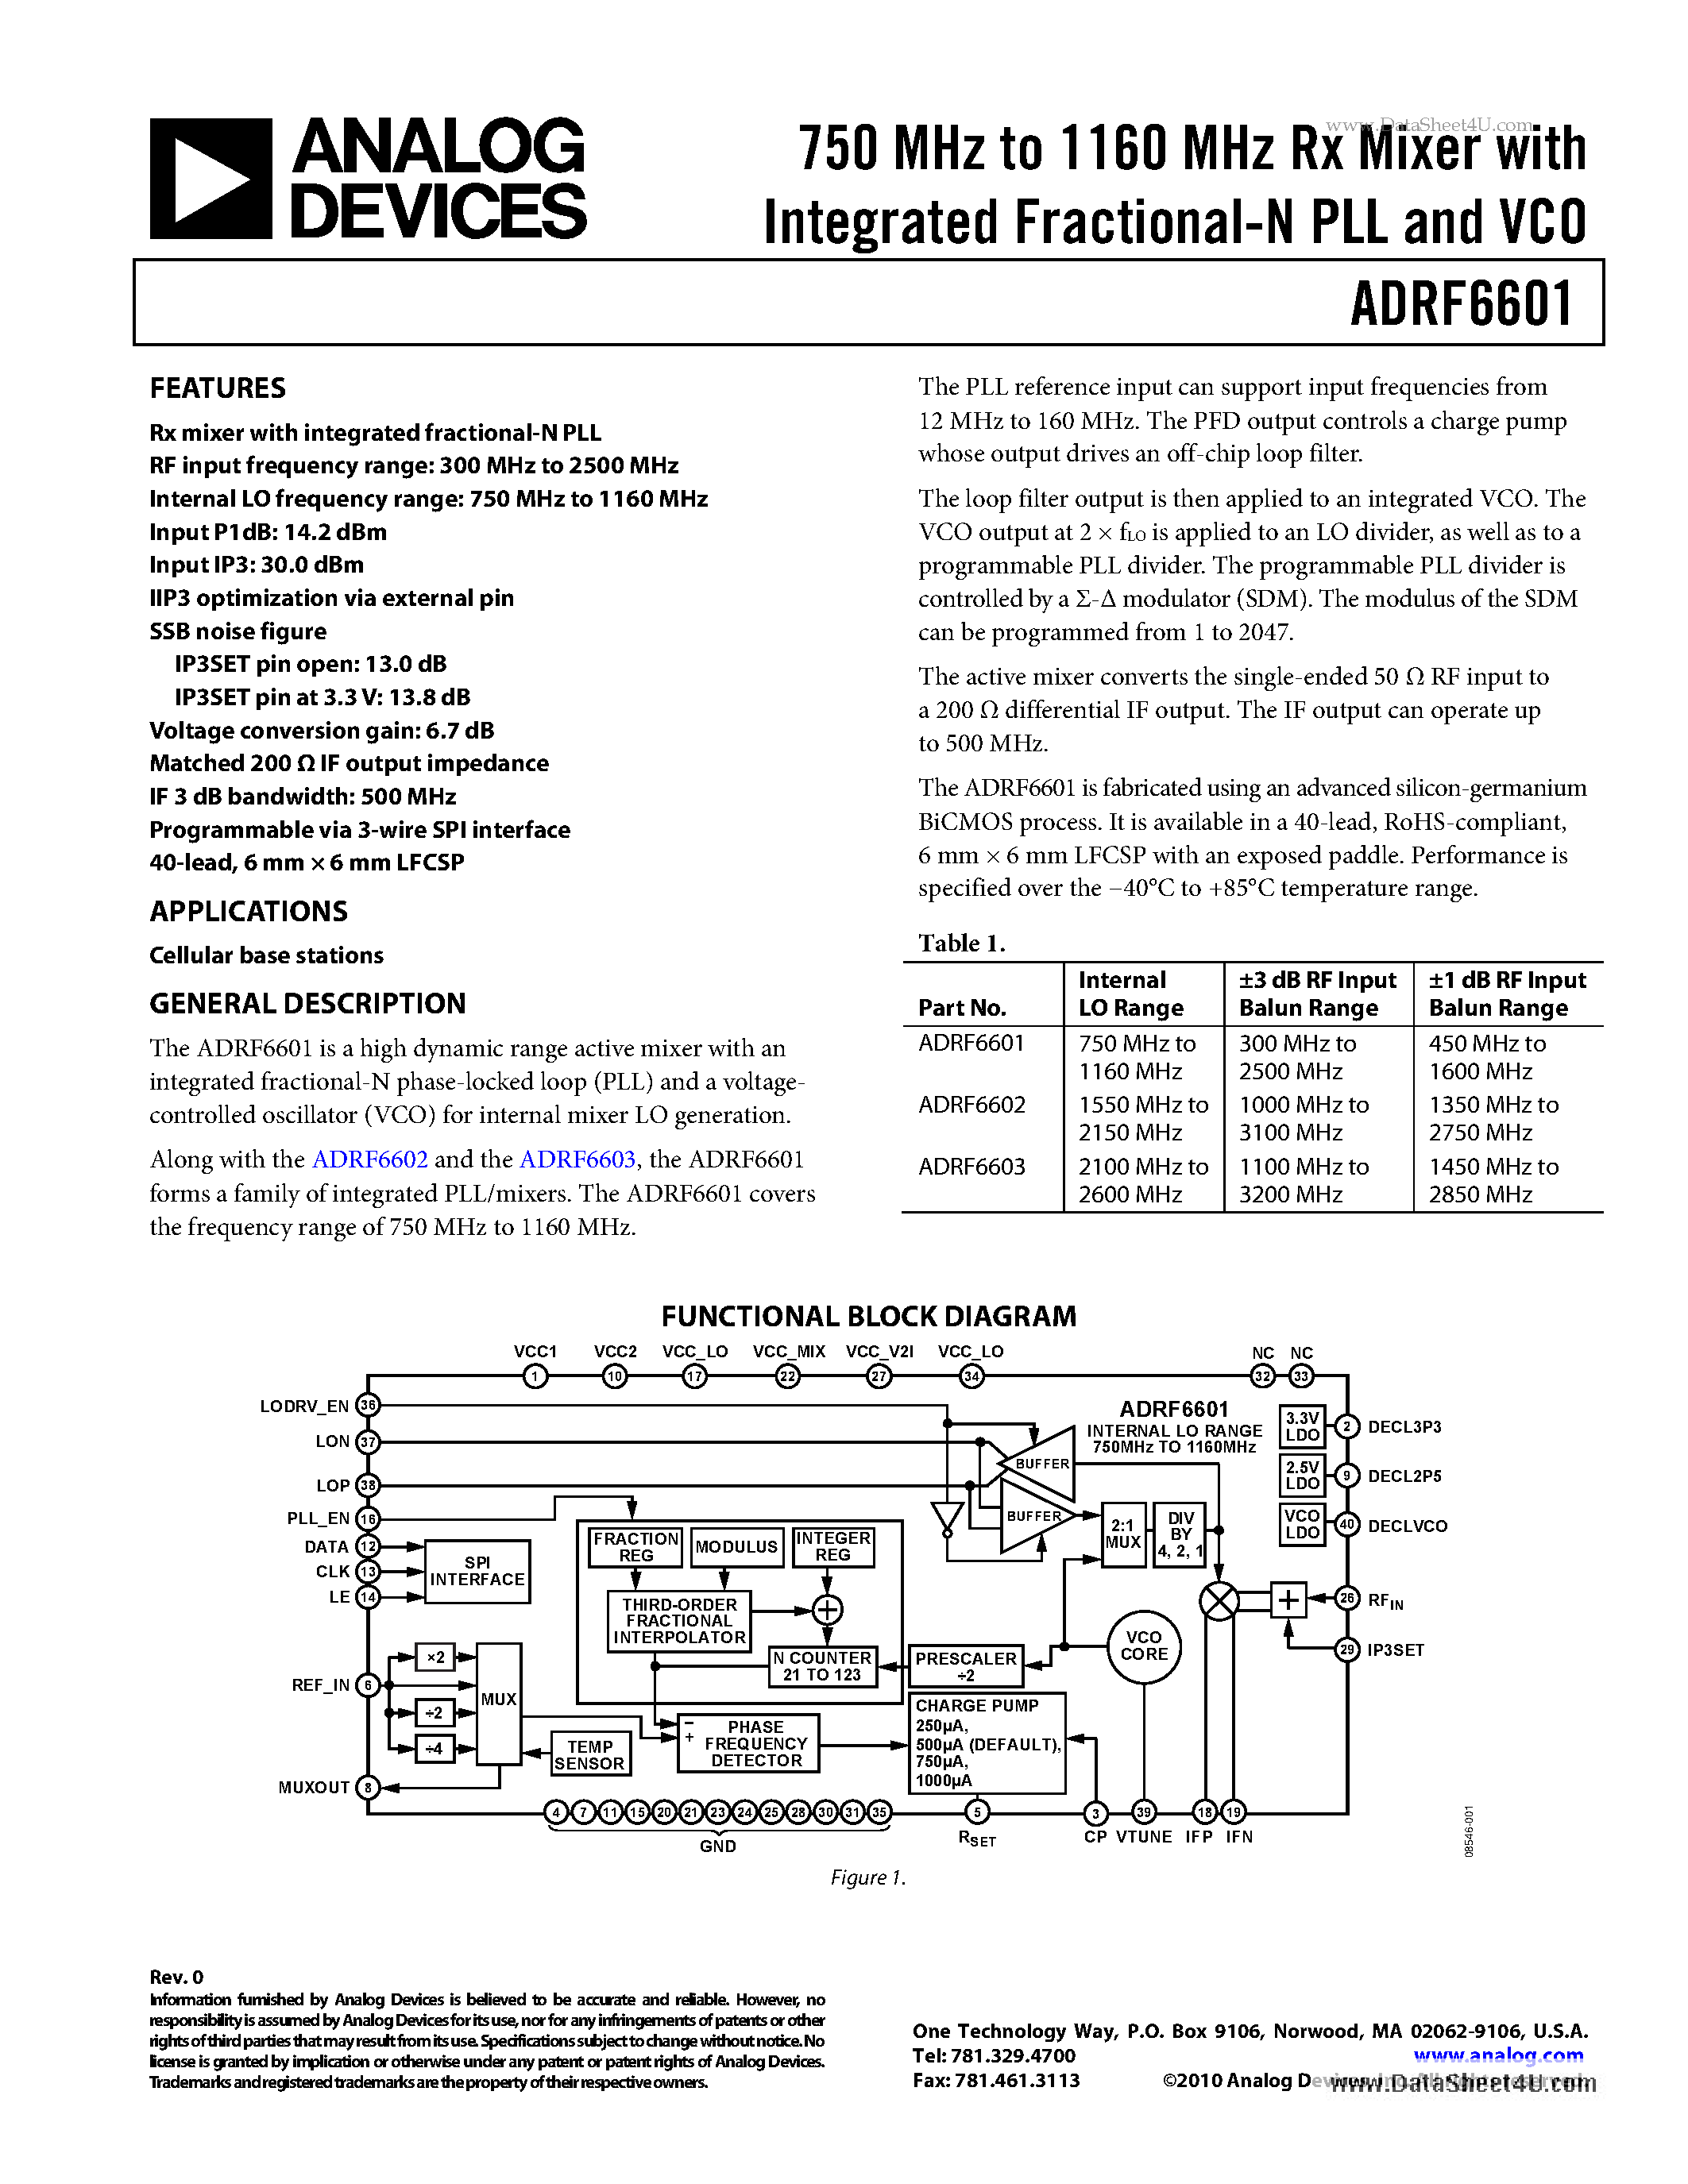 Даташит ADRF6601 - 750 MHz to 1160 MHz Rx Mixer страница 1